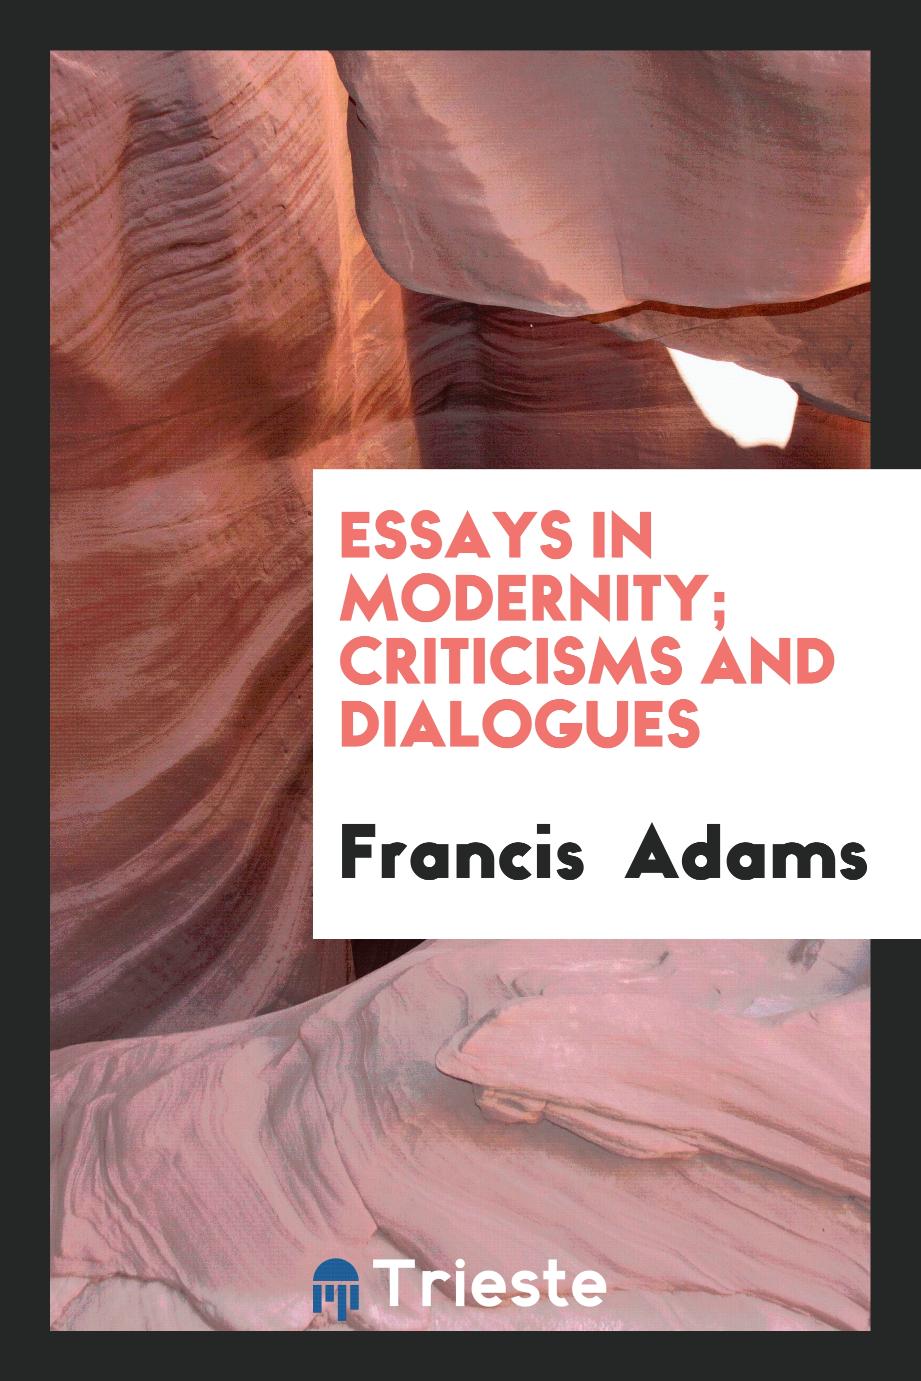 Essays in modernity; criticisms and dialogues